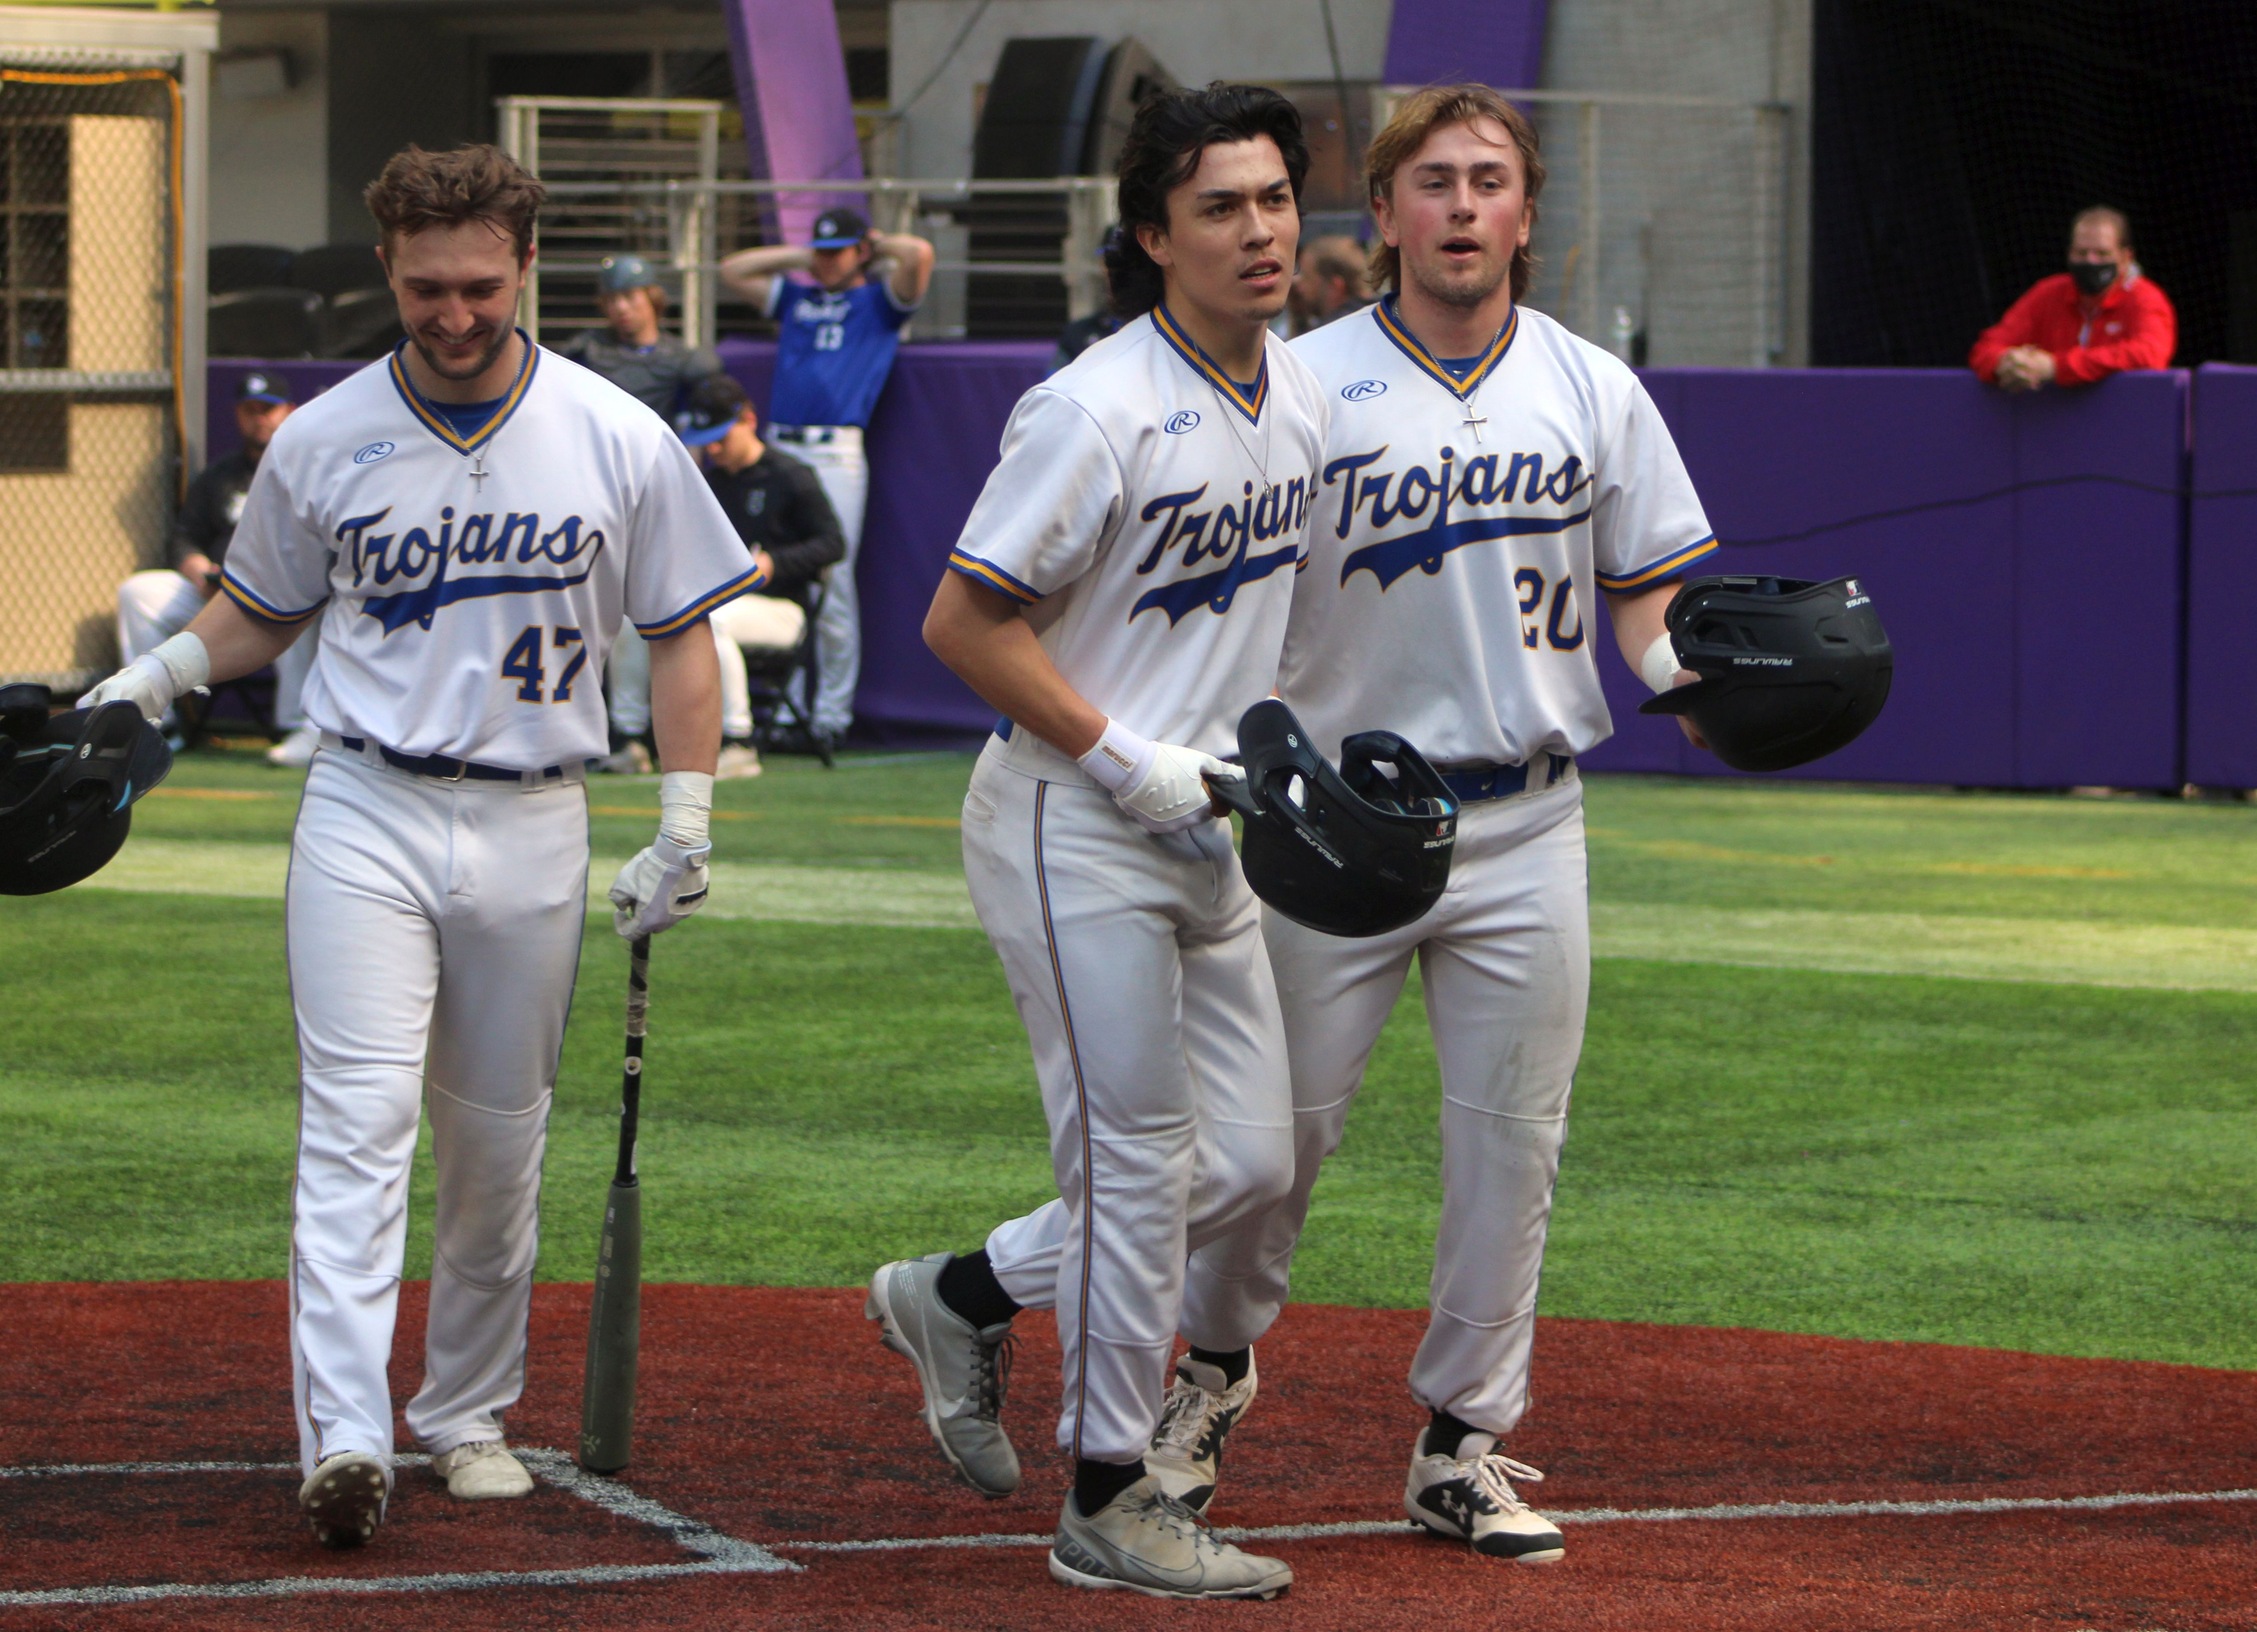 NIACC's Jon Koehn (center) celebrates his two-run home run in the first game of Wednesday's doubleheader against Bryant & Stratton at US Bank in Minneapolis.